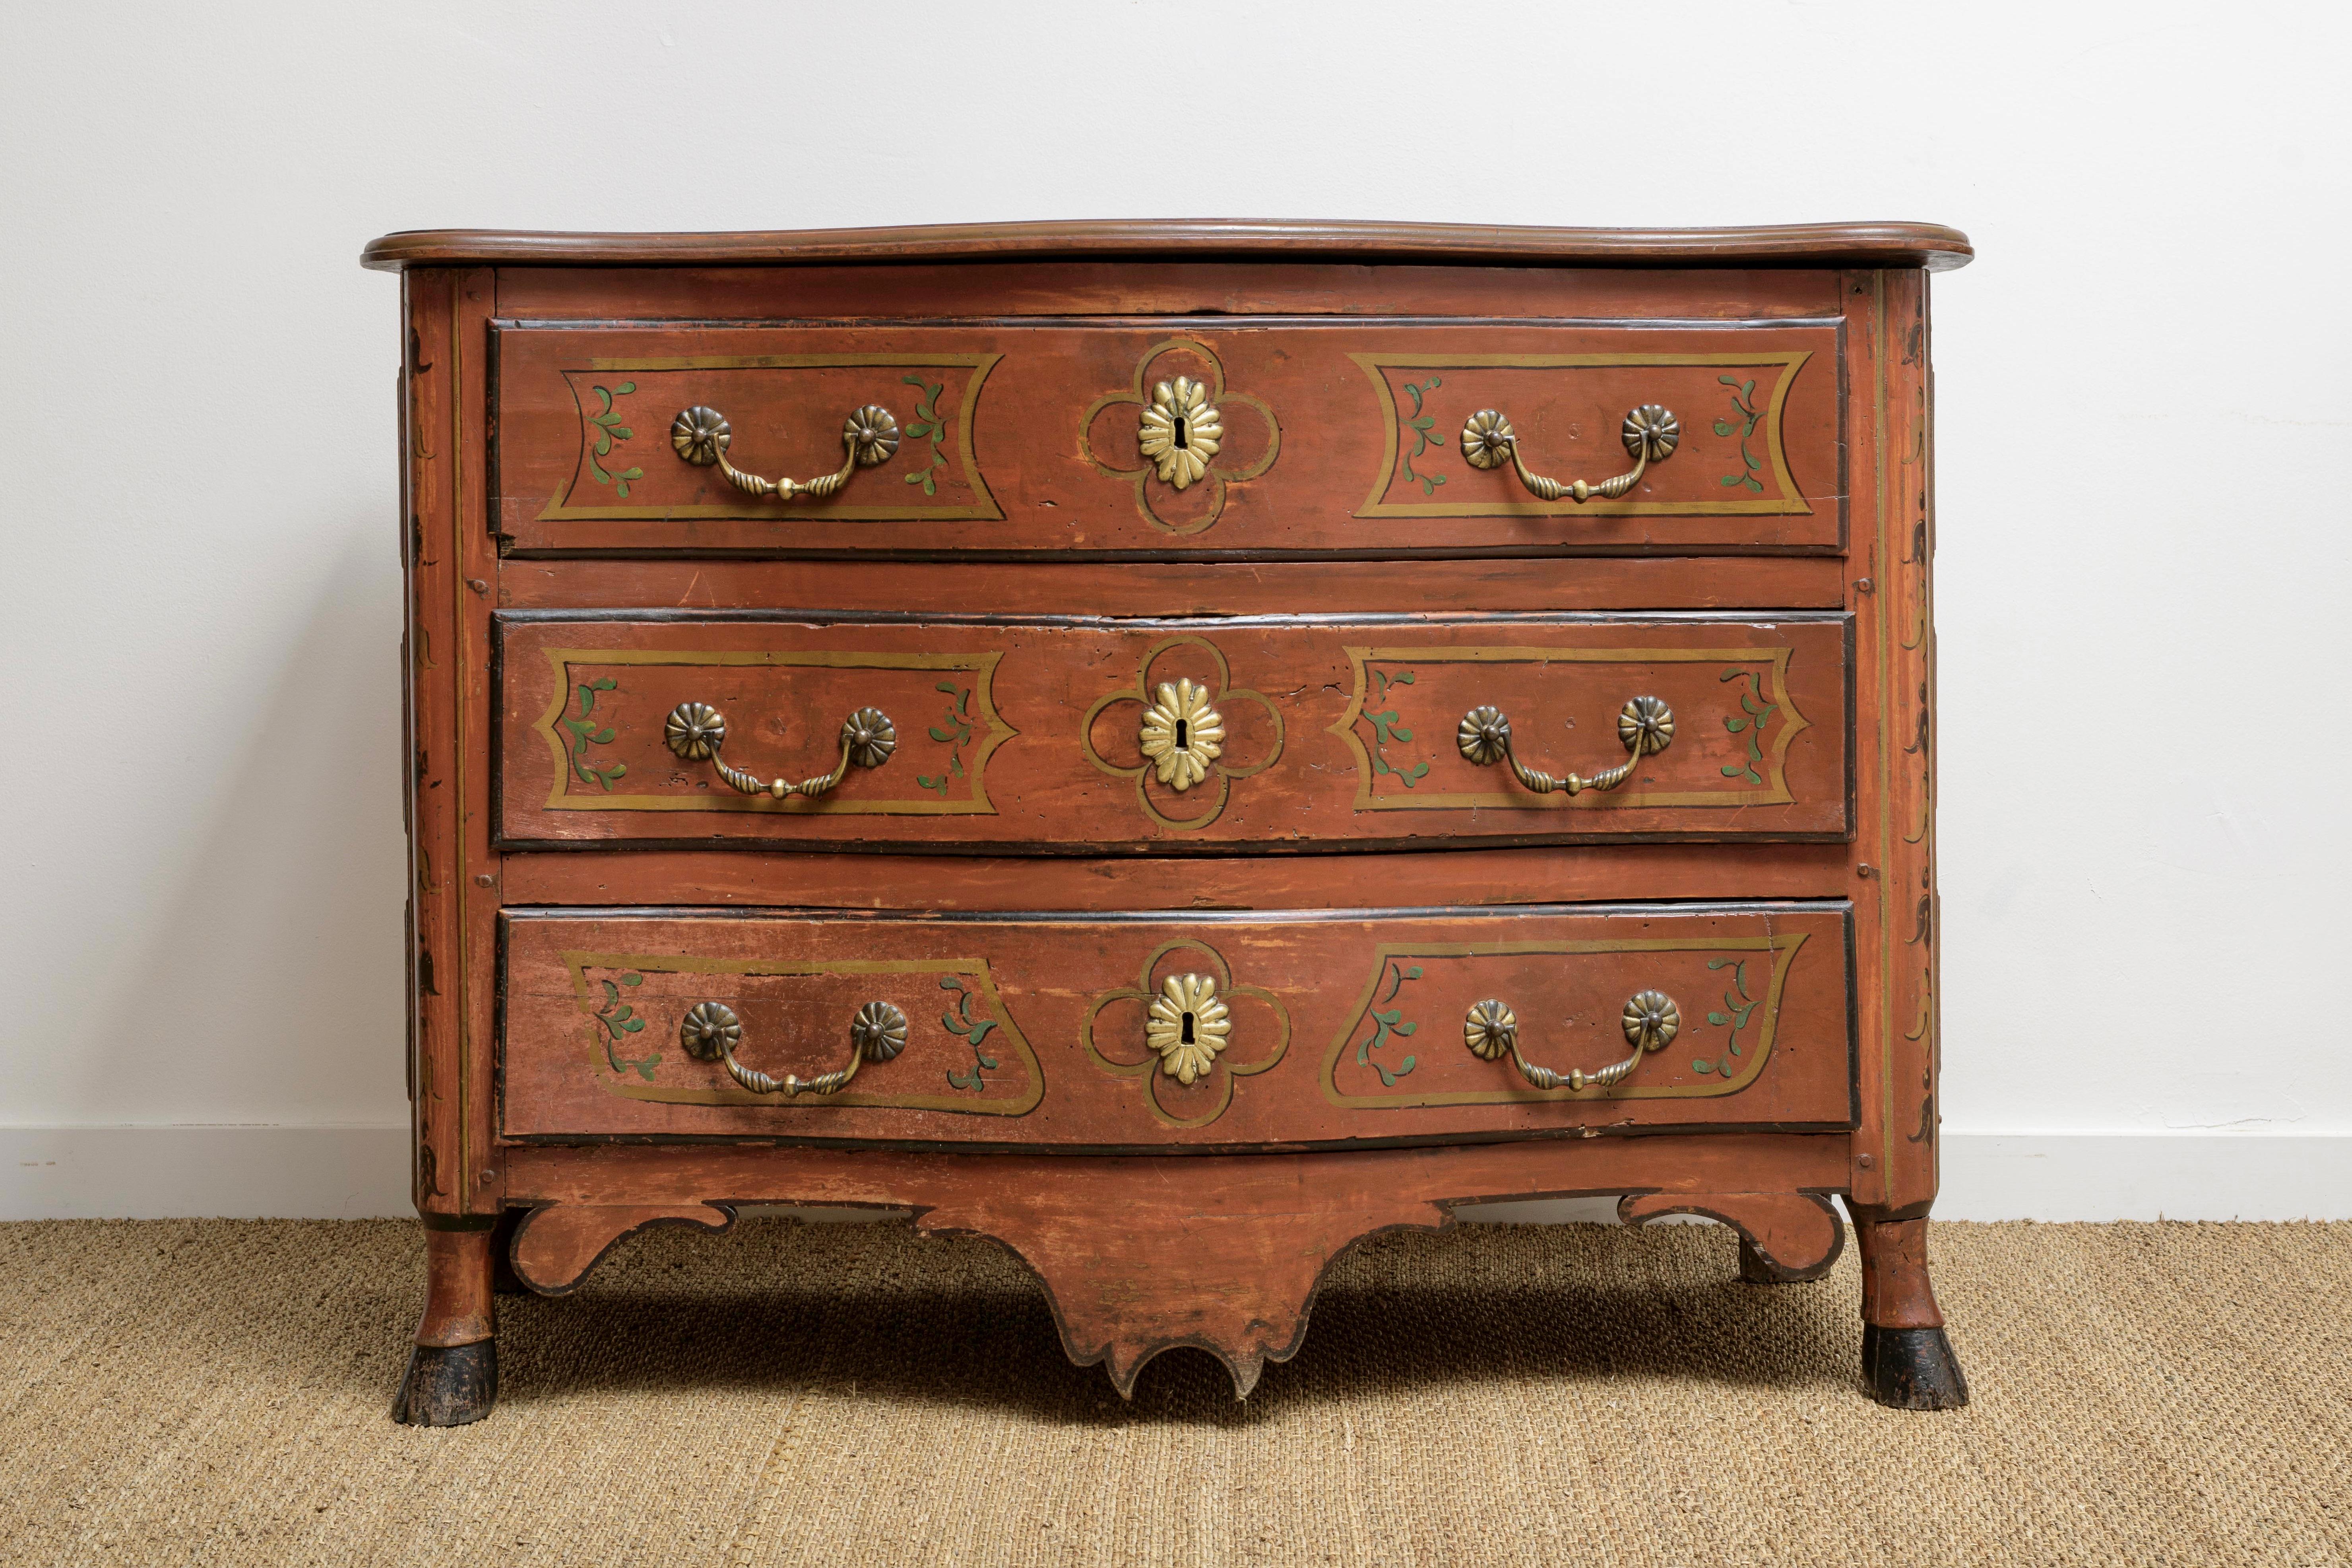 Louis XV regency period chest with original oxblood (sang de bœuf) paint  and hoof feet ca.1720.   Wonderful sides with proud flat panels decorated in same scheme. 
Wonderful color and decorative painted faux panels in gold with leaves and festoons,